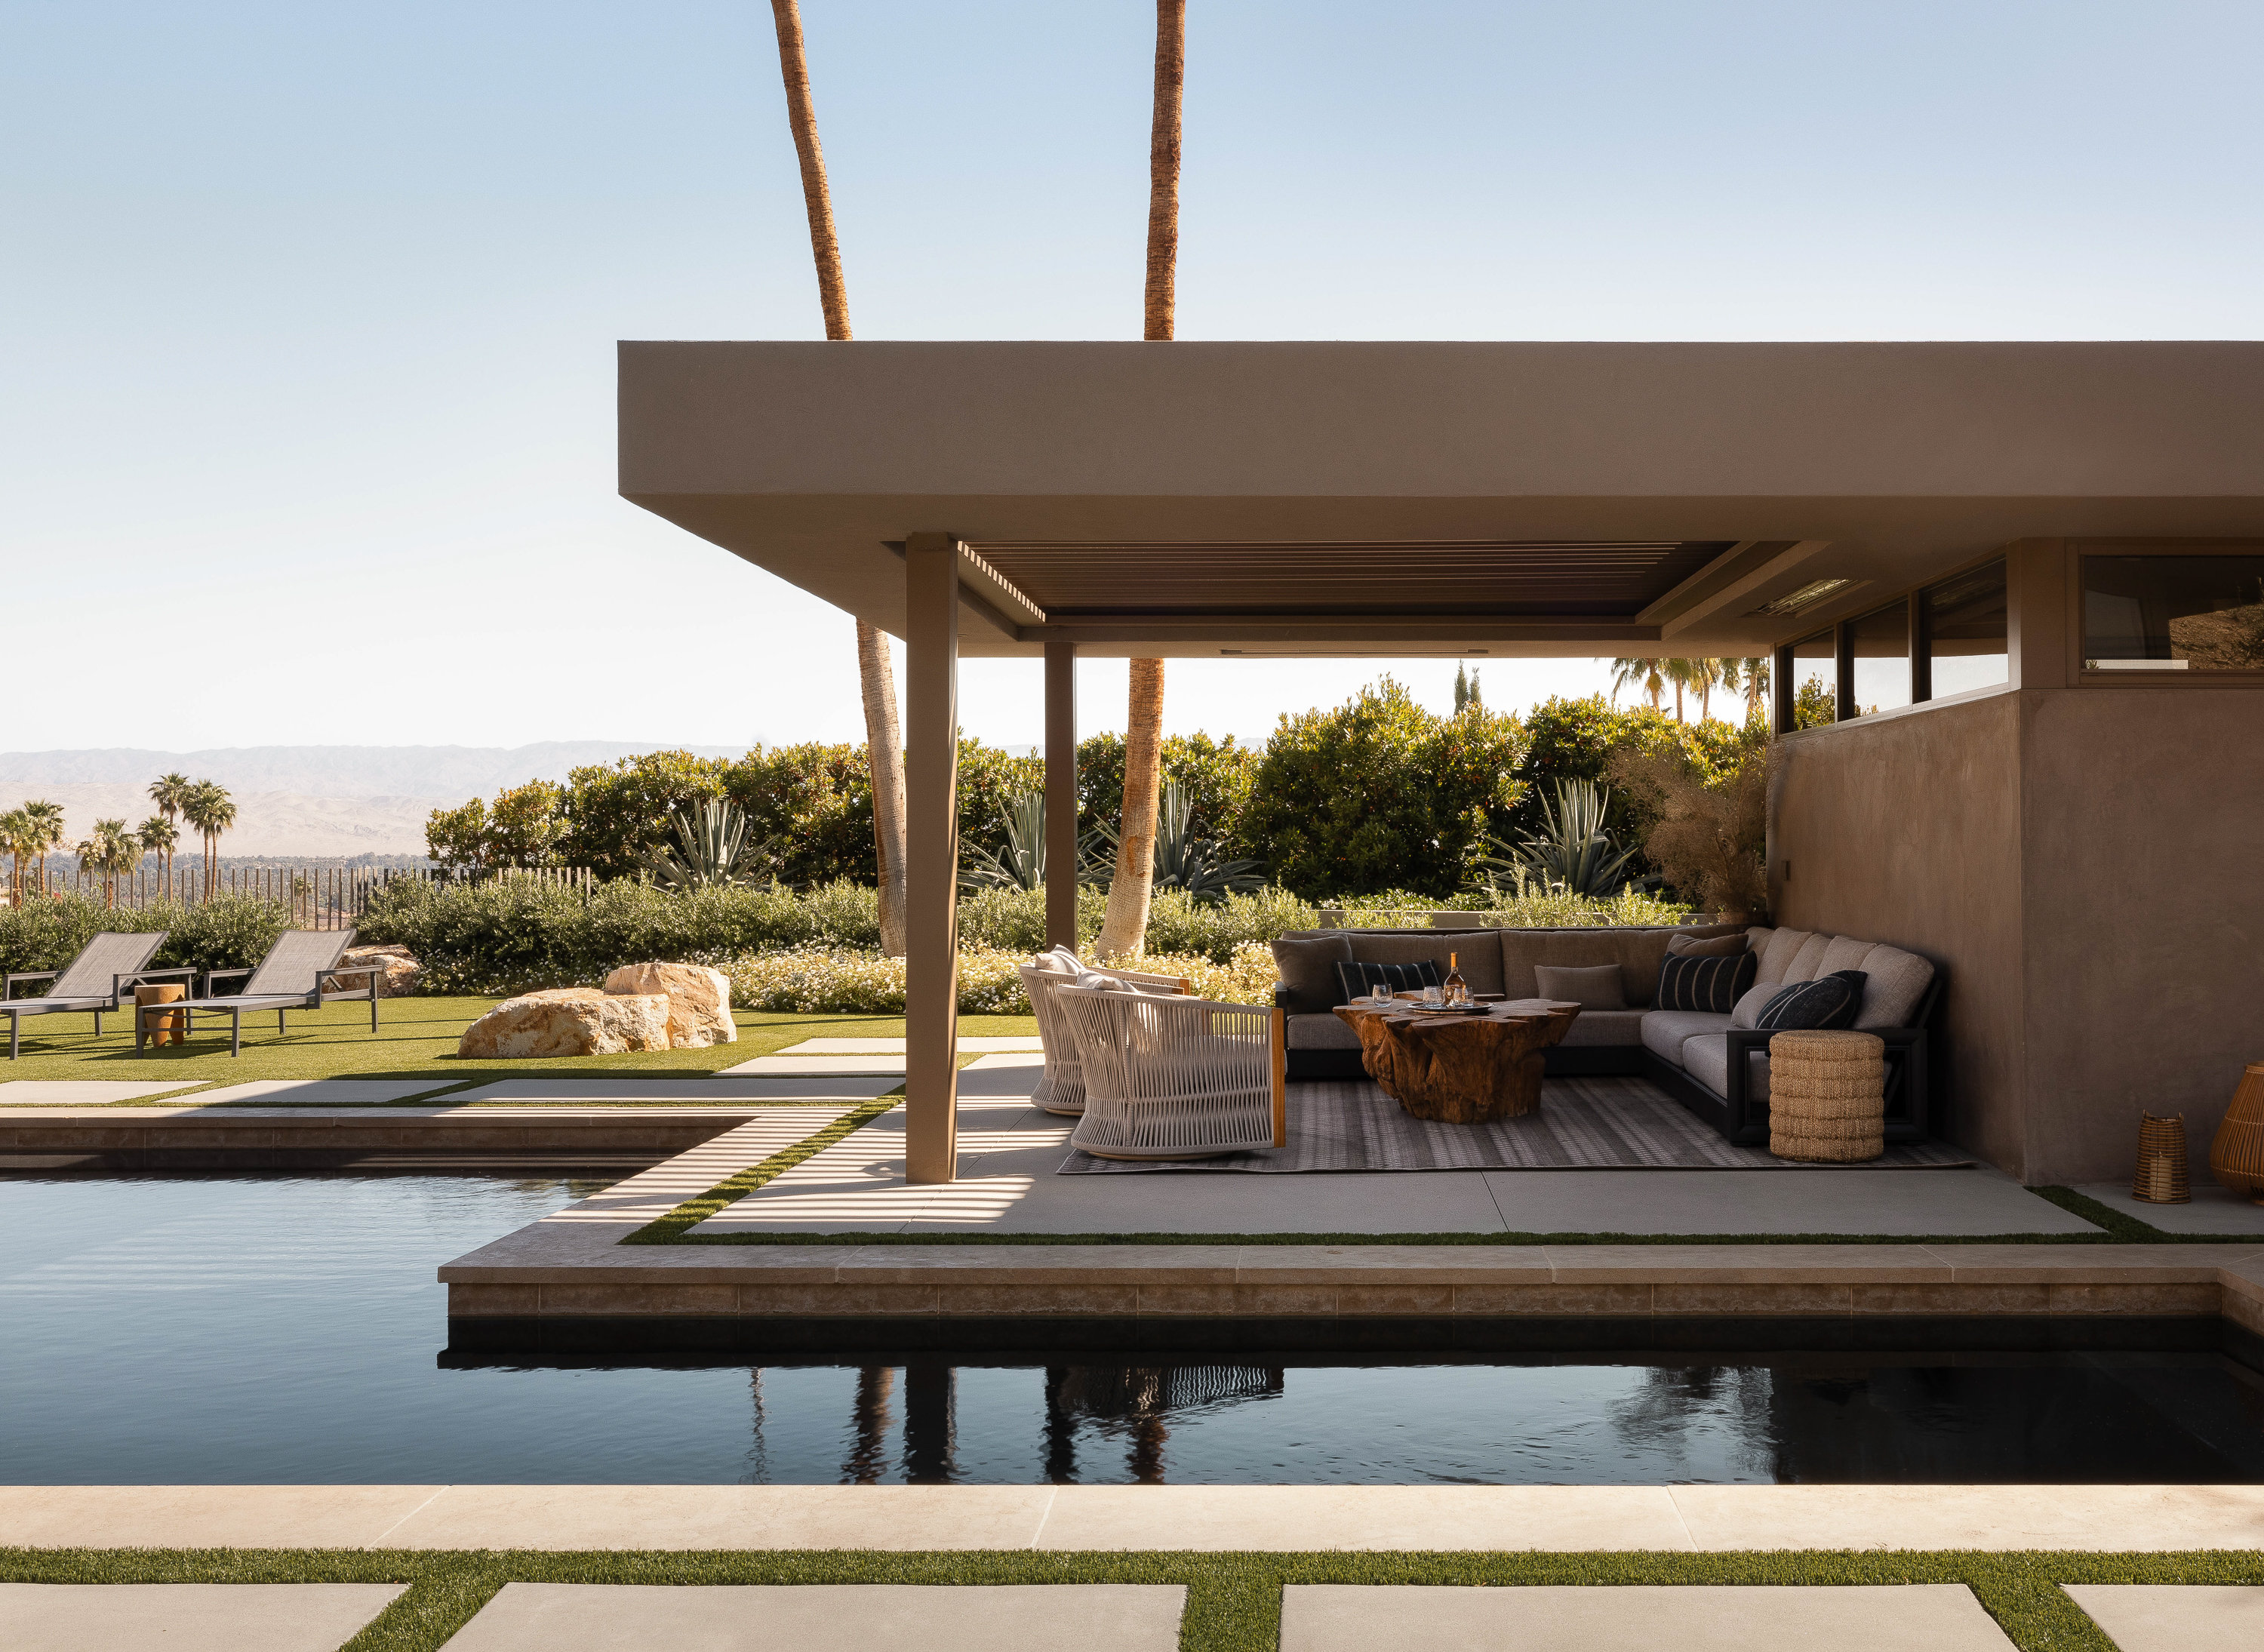 The outdoor living room is the focal point, with the exercise room's roof extending to create shade for the poolside sectional, offering a perfect spot for relaxation